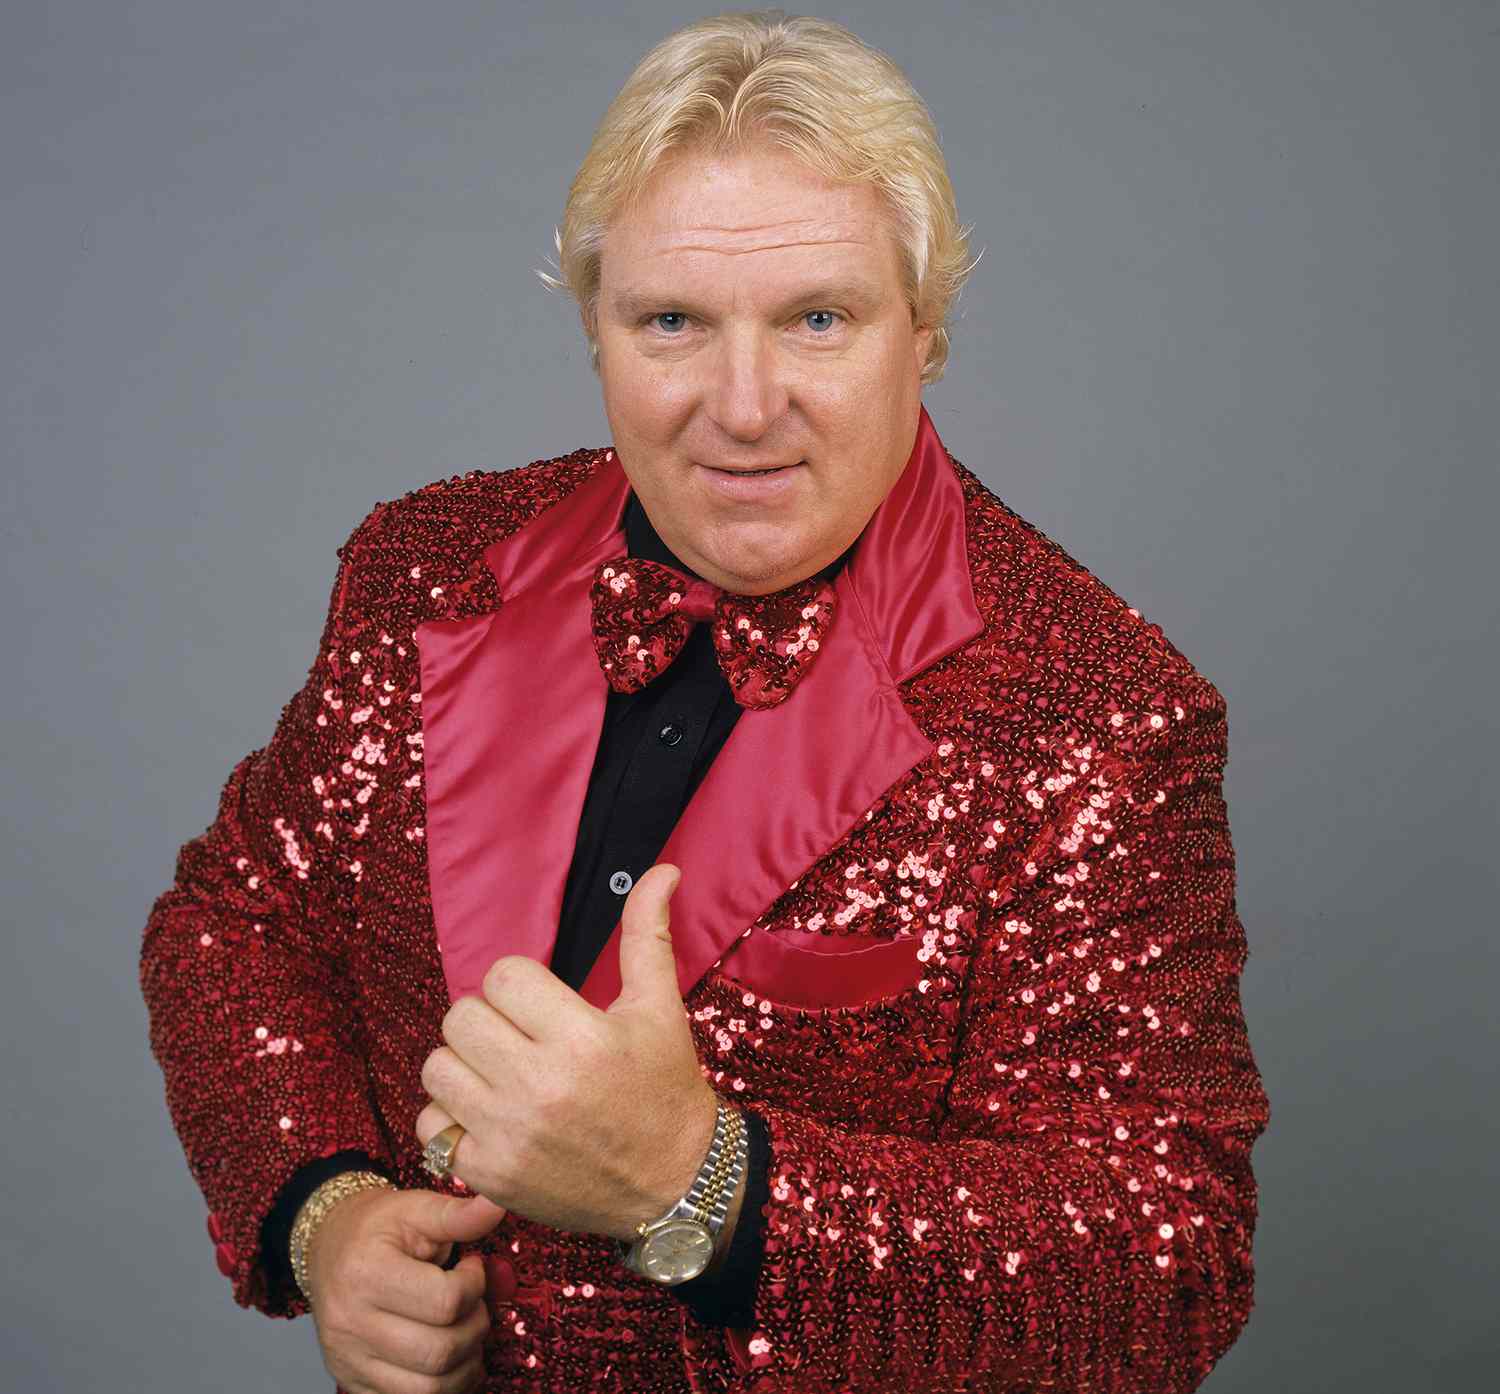 Bobby Heenan, giving a thumbs-up with his left hand, smiling, wearing a flashy, red suit.